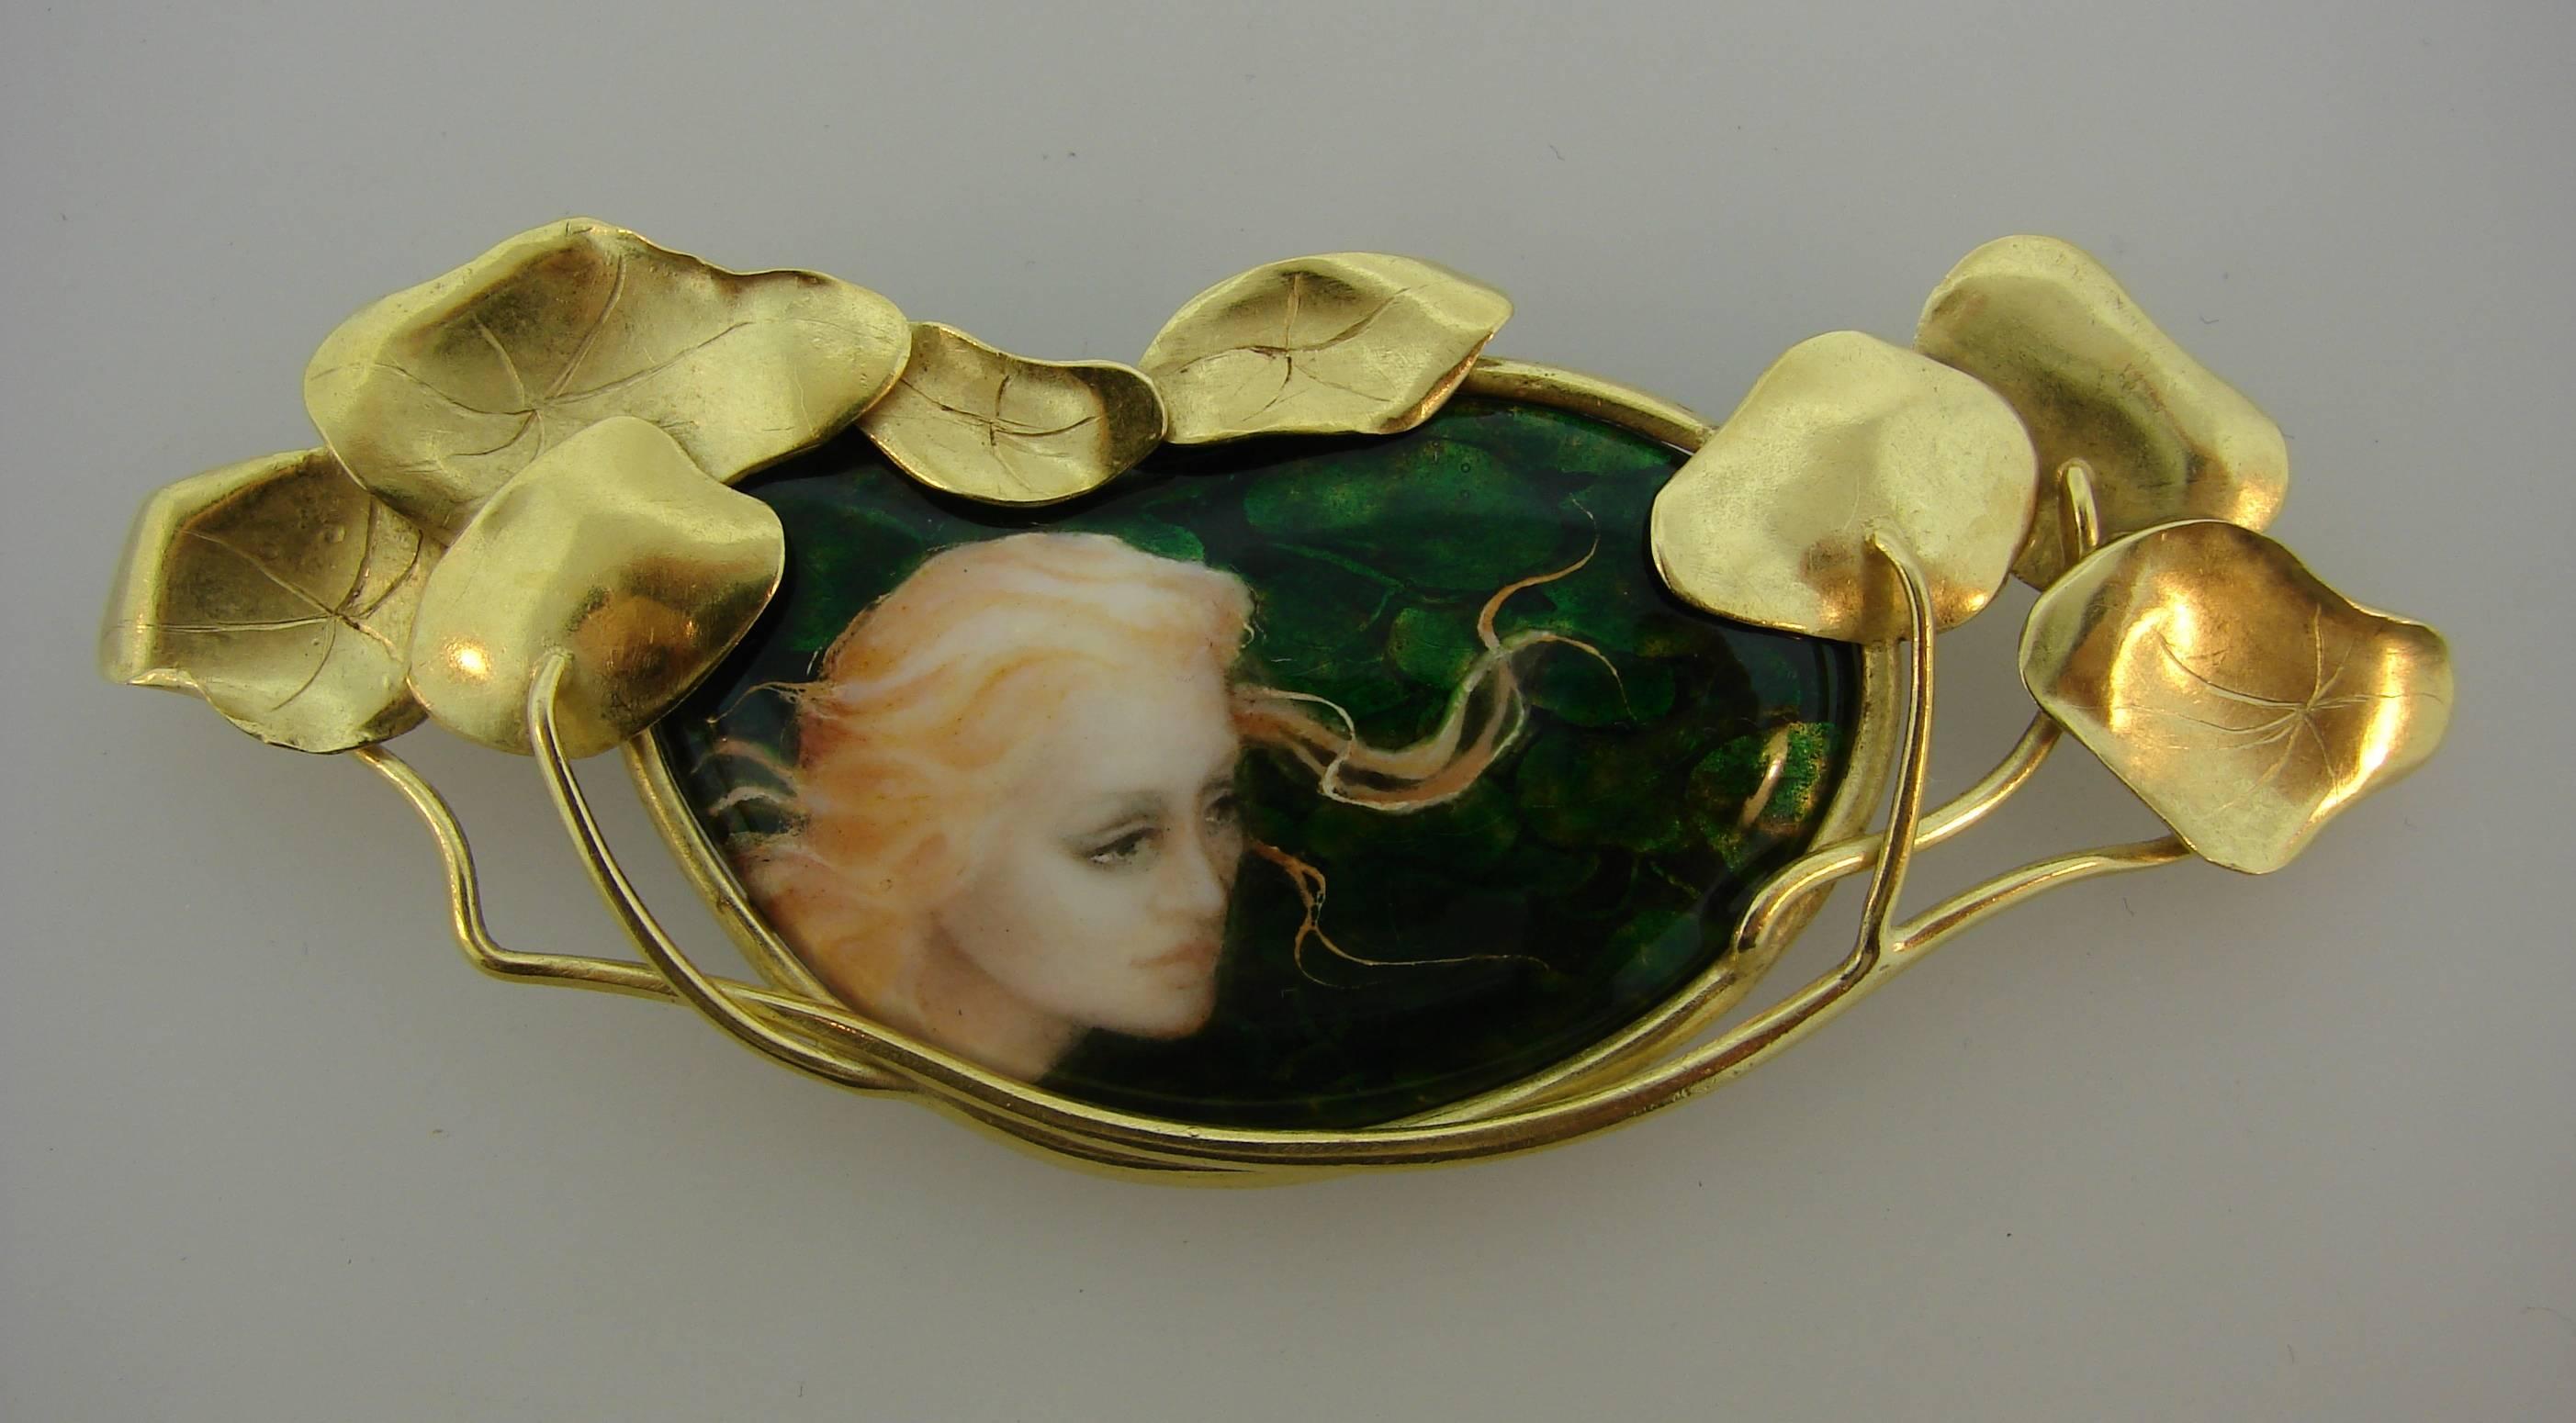 Gorgeous Art Nouveau Revival brooch created by an artist Larissa Podgoretz who often finds her inspiration in a face or gesture that has the purity of line and color. 
The brooch is made by hand of 18 karat yellow gold and beautiful Lemoges style